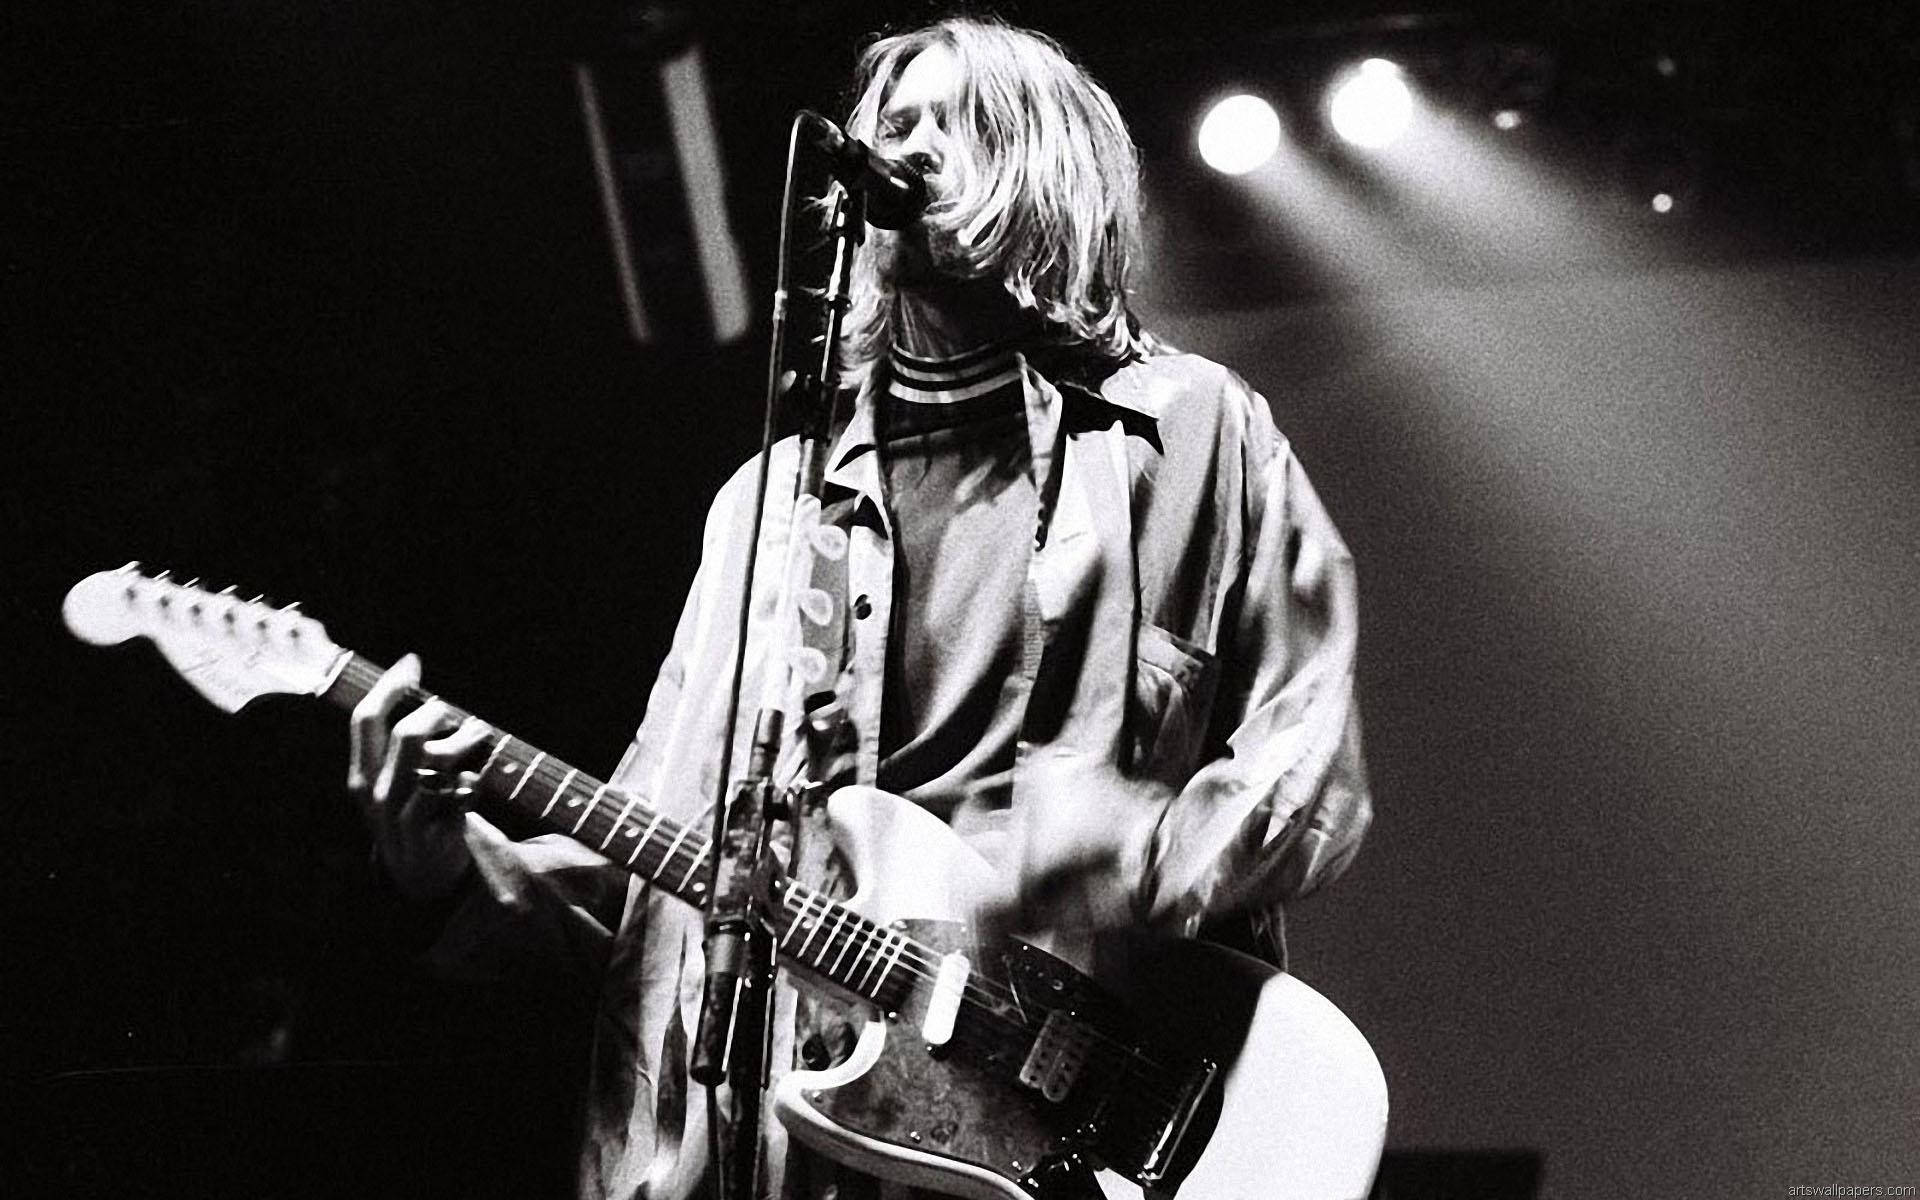 2560x1440 / 2560x1440 kurt cobain background hd - Coolwallpapers.me!